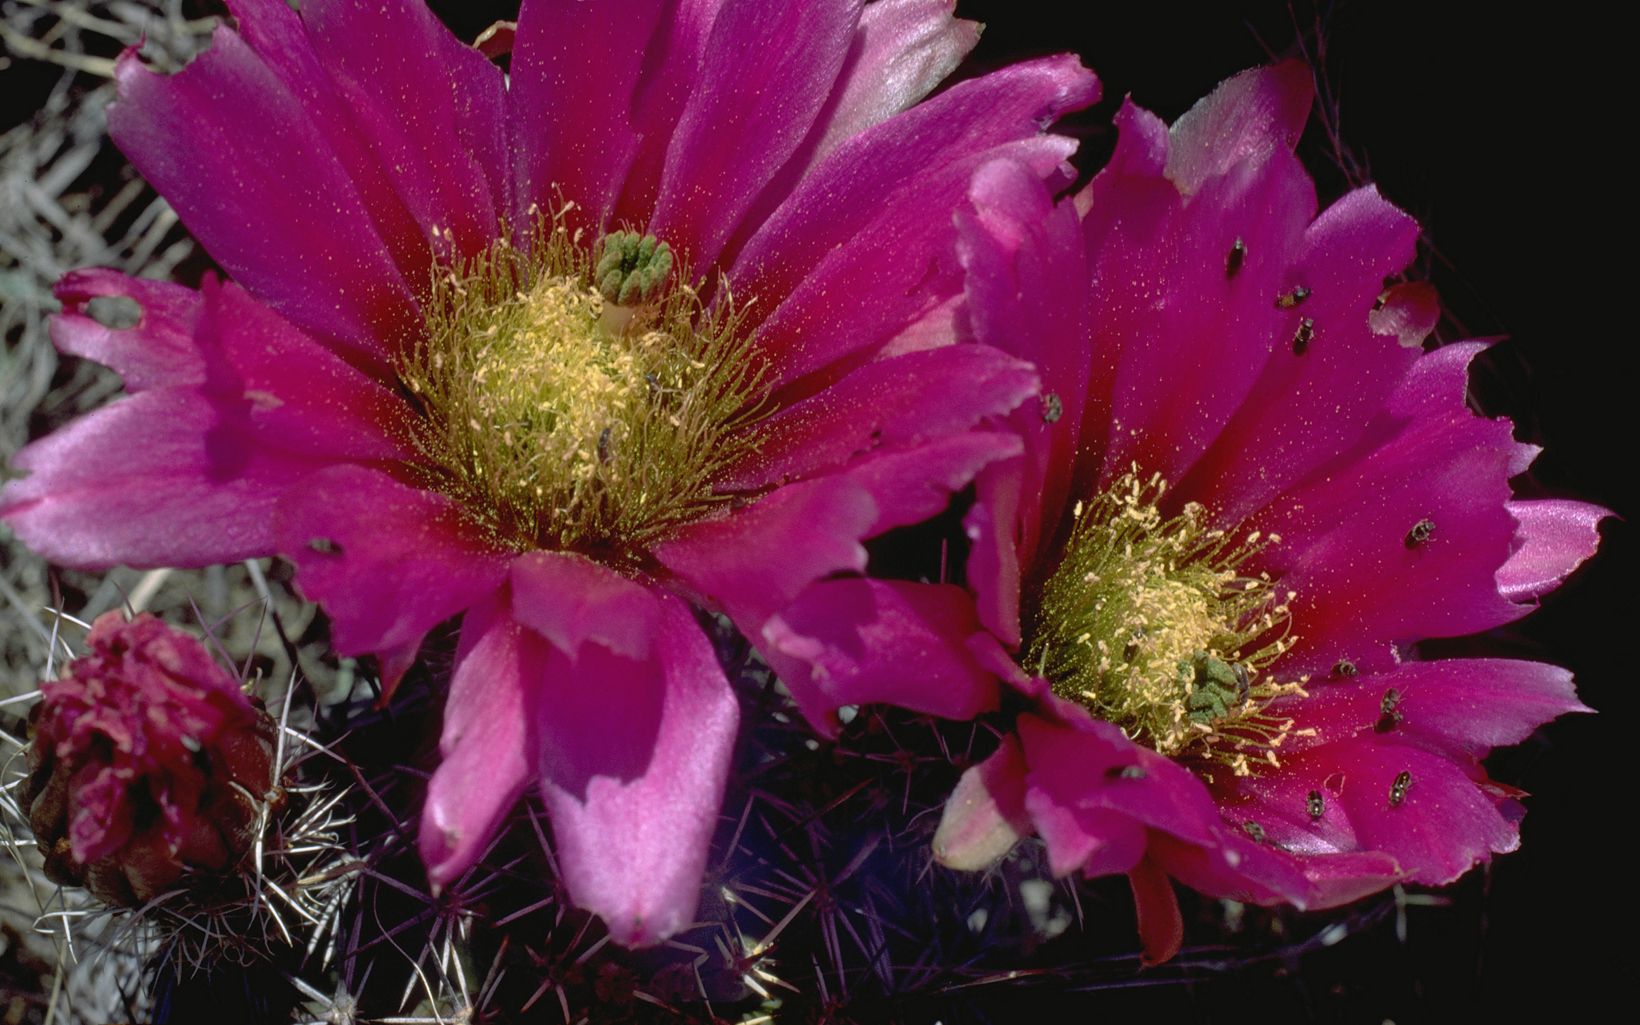 Hedgehog Cactus Growing at Diamond A Ranch (formerly Gray Ranch) in New Mexico. © Harold E. Malde